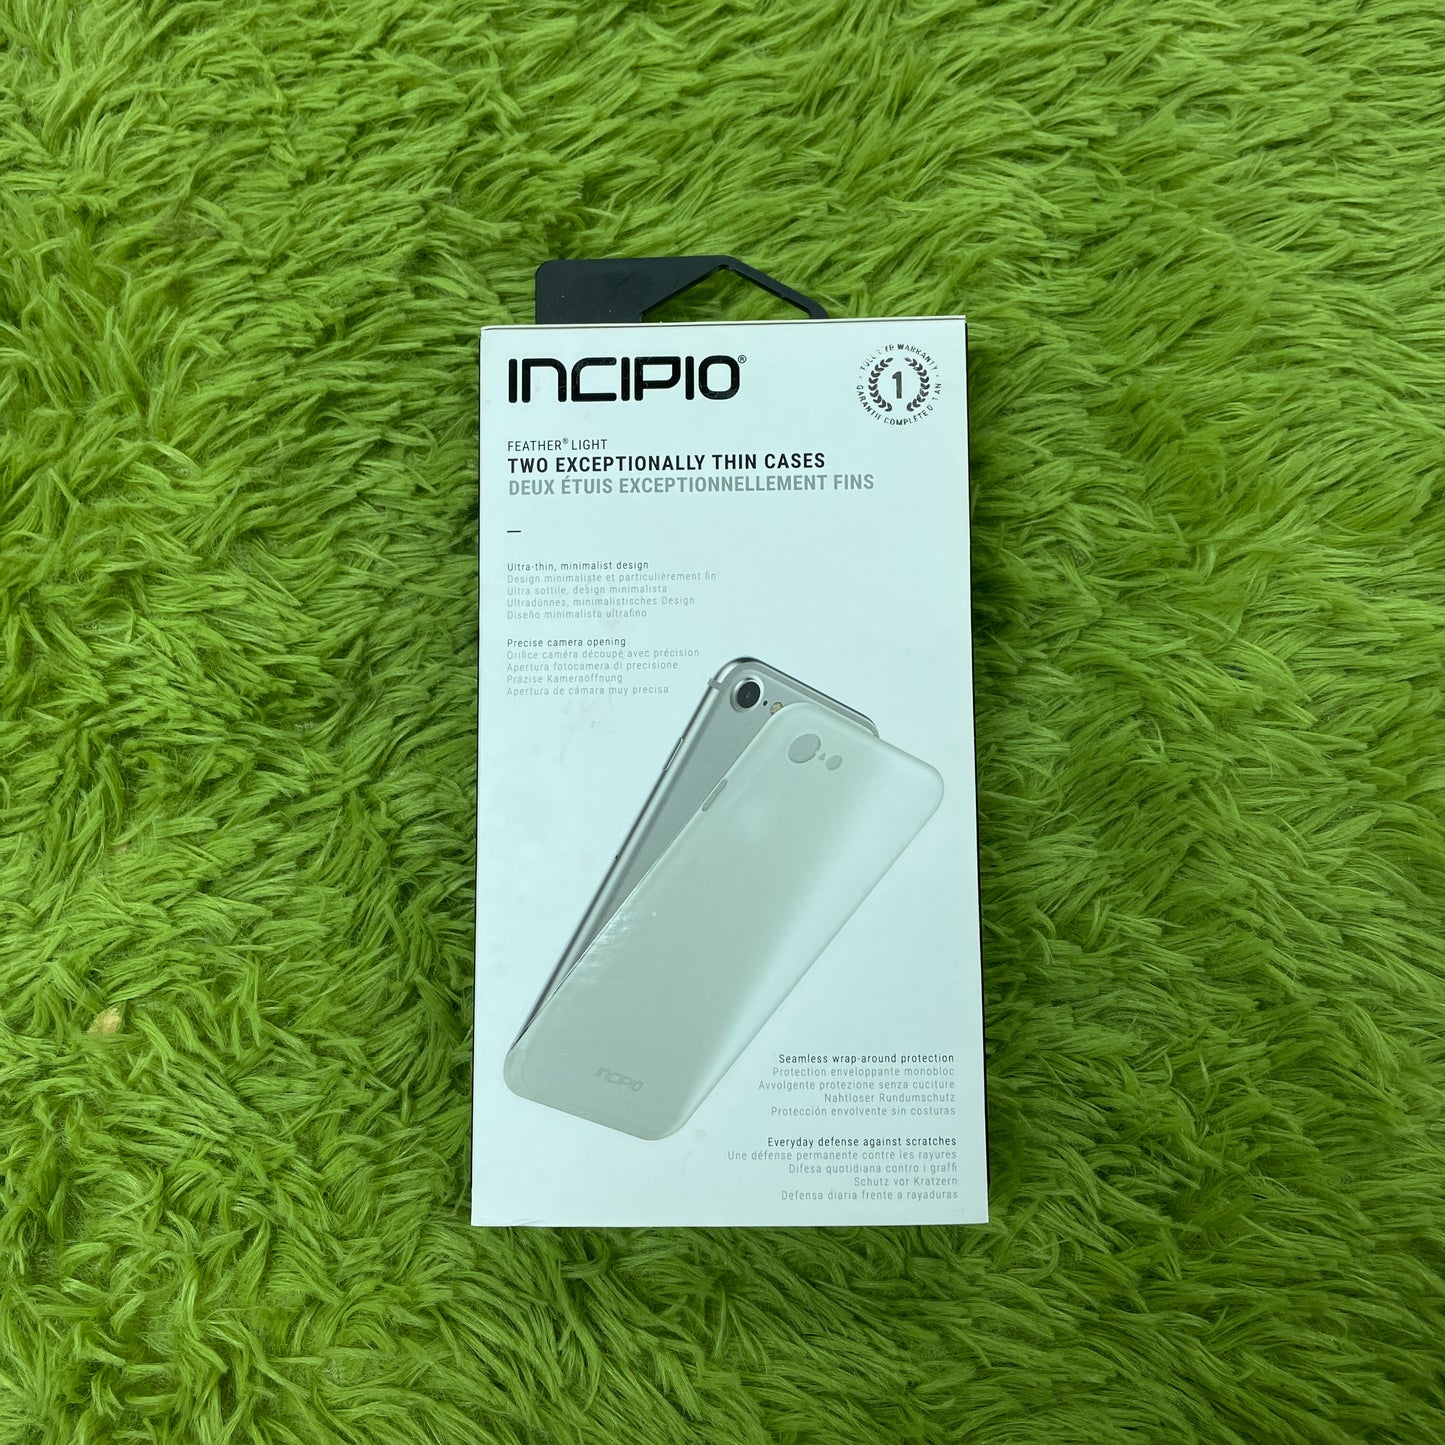 iPhone 6/7/8 Incipio Feather Light Protective Case 2 Pack